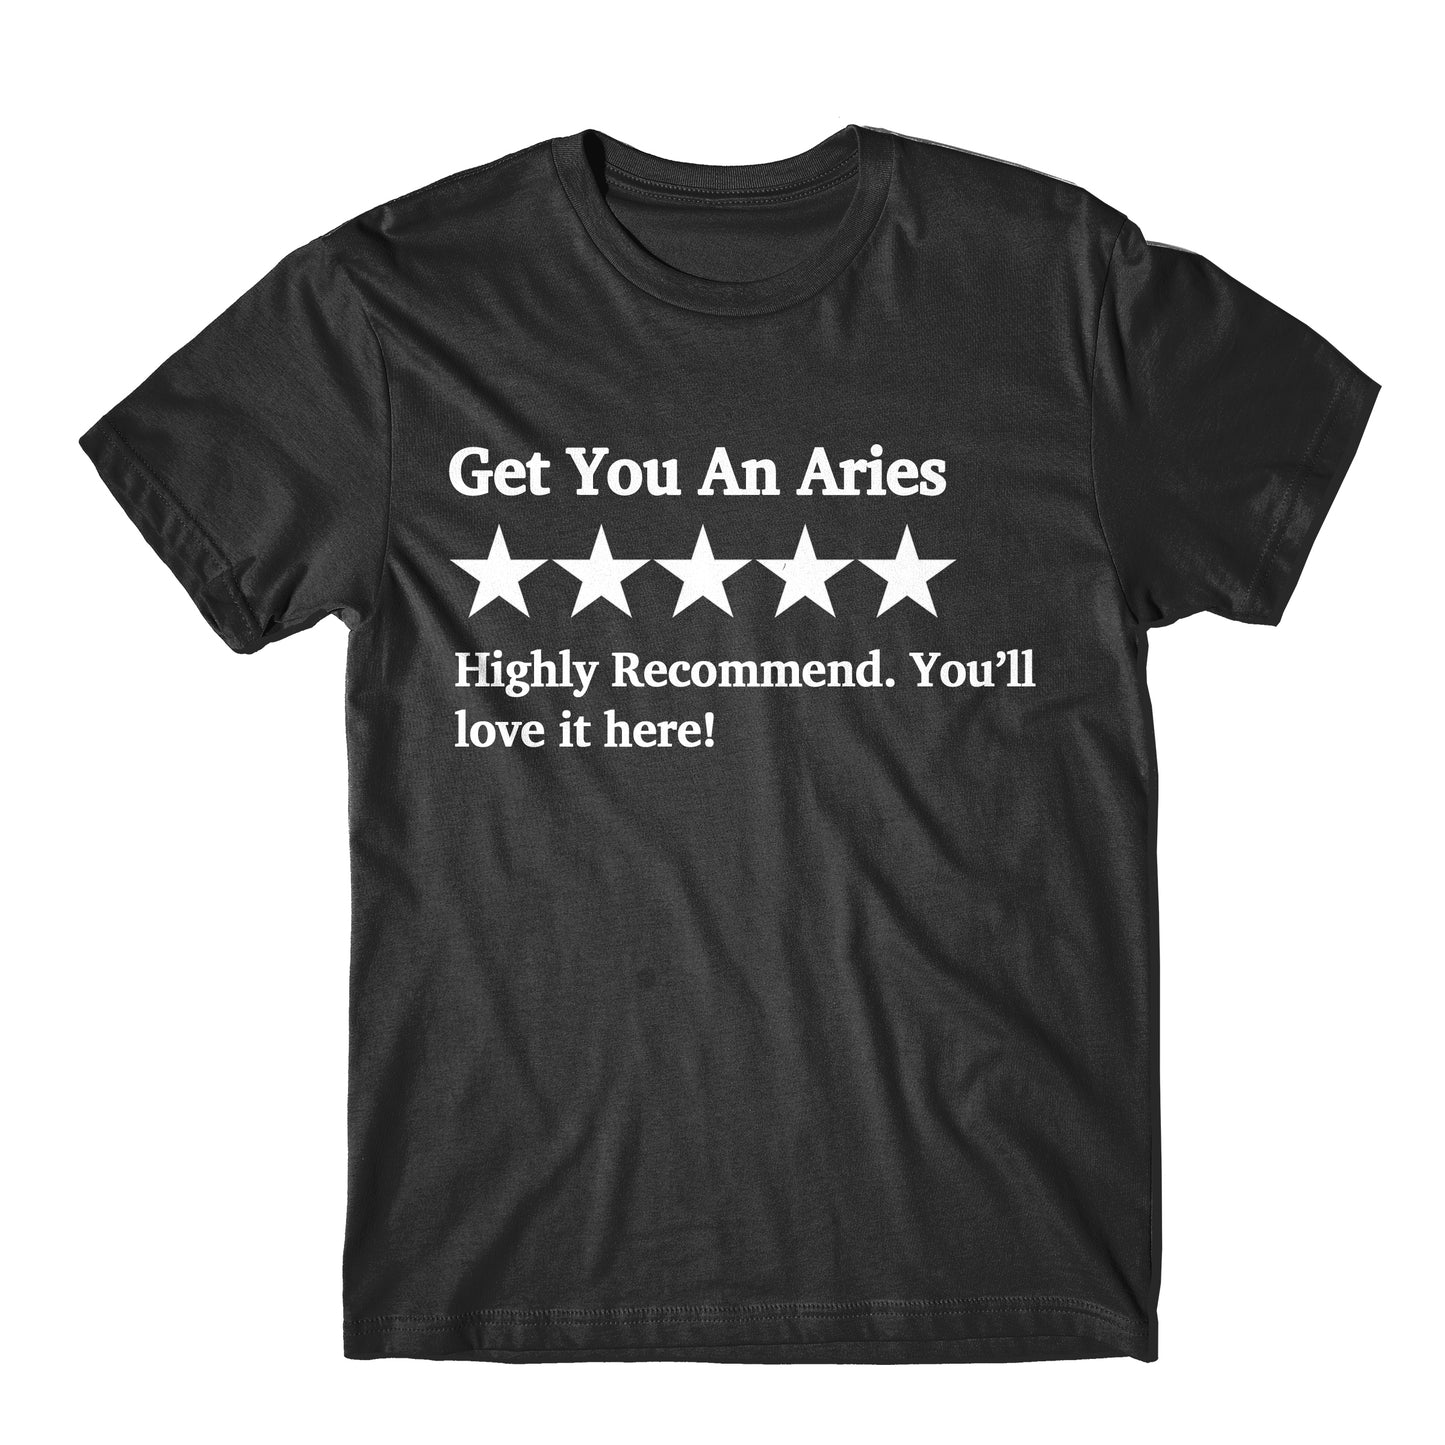 "Get You An Aries Five Star Rating" Tee